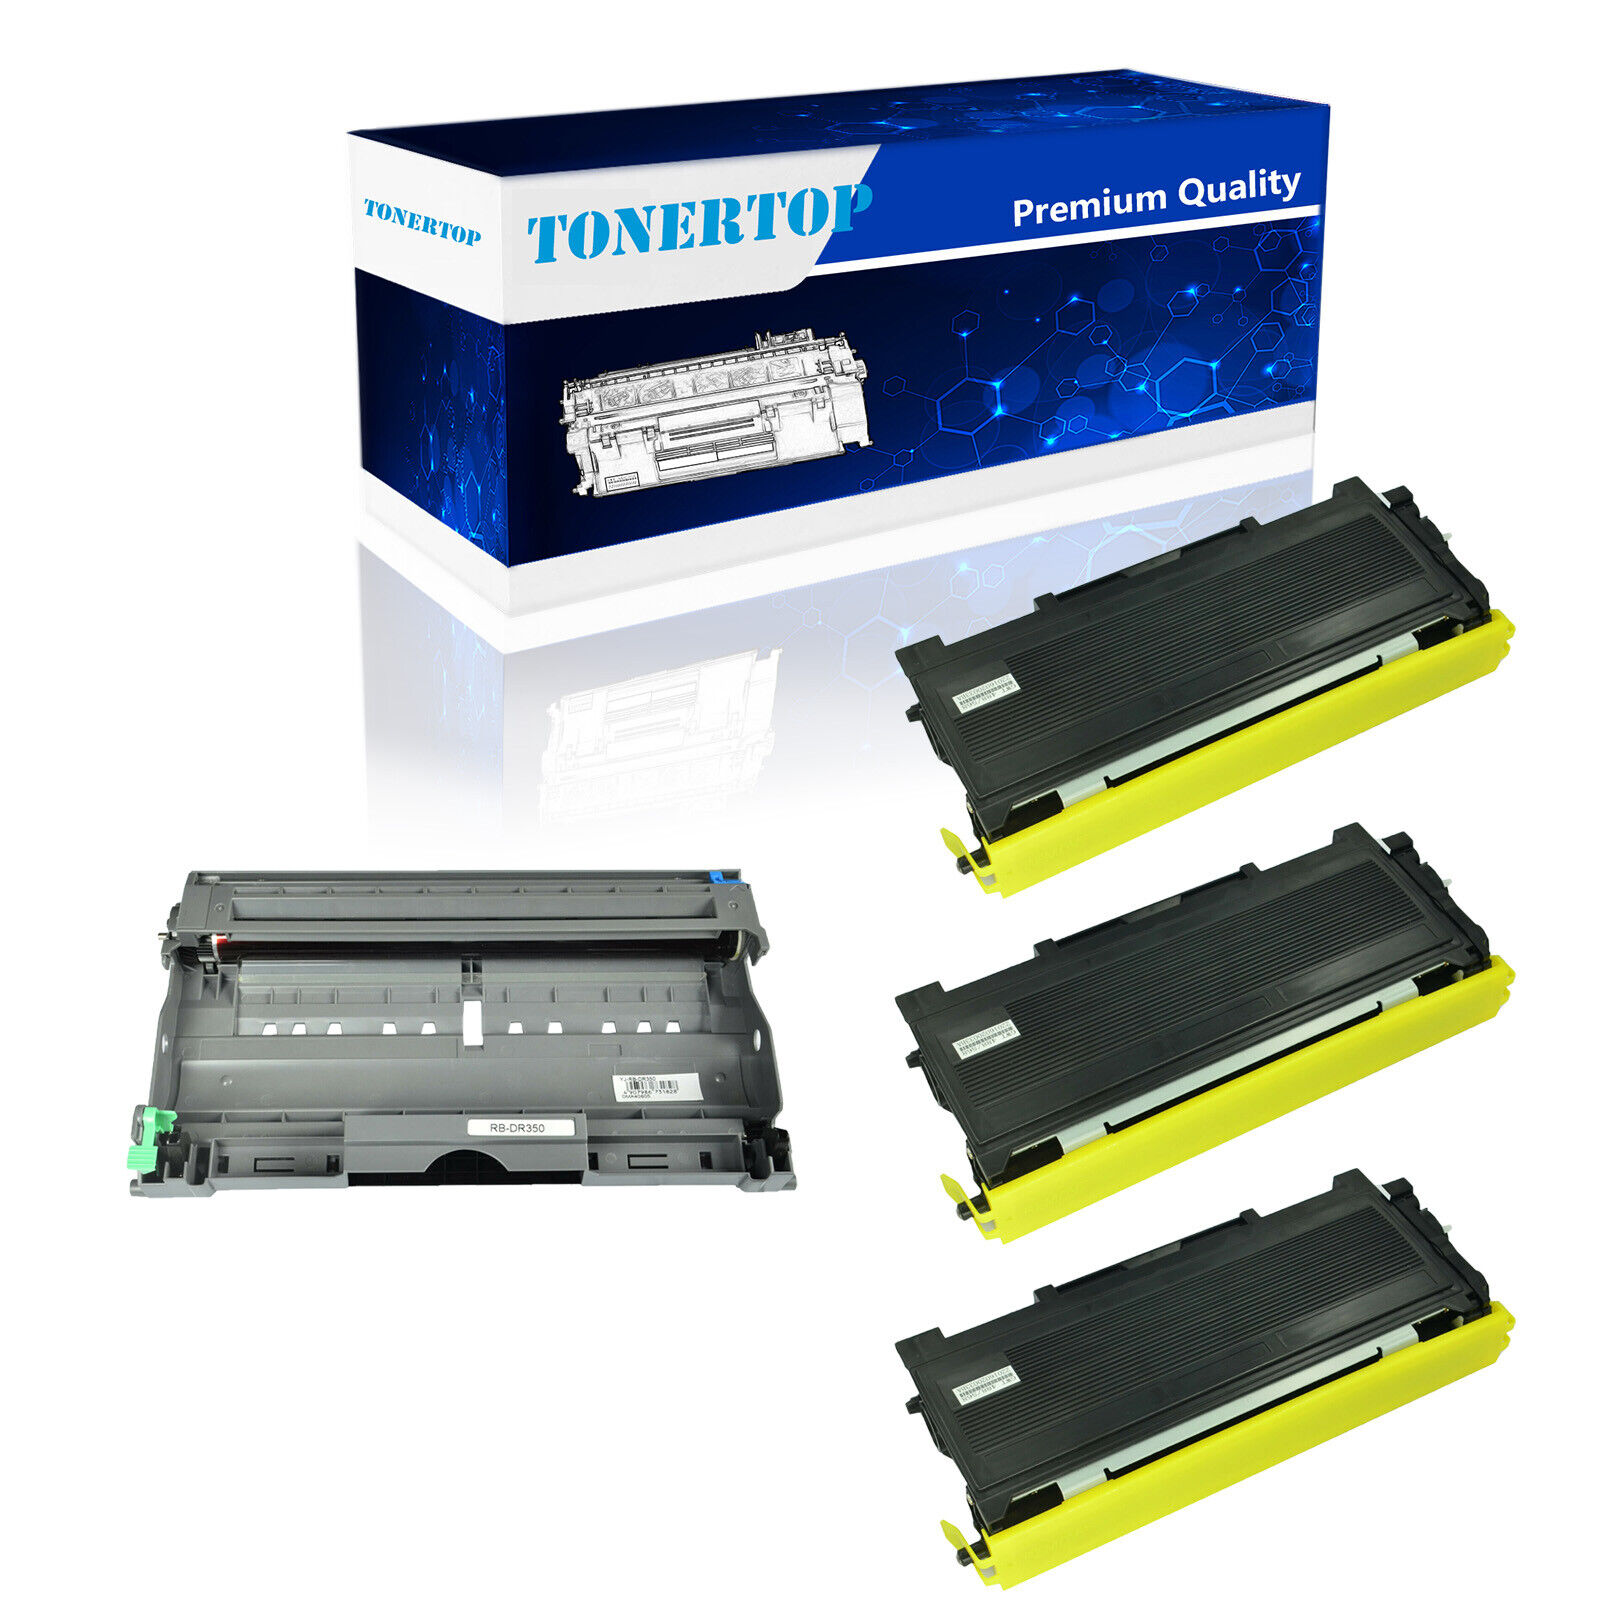 3PK TN350 Toner & 1PK DR350 Drum For Brother DCP-7025 FAX-2810 FAX-2825 FAX-2820